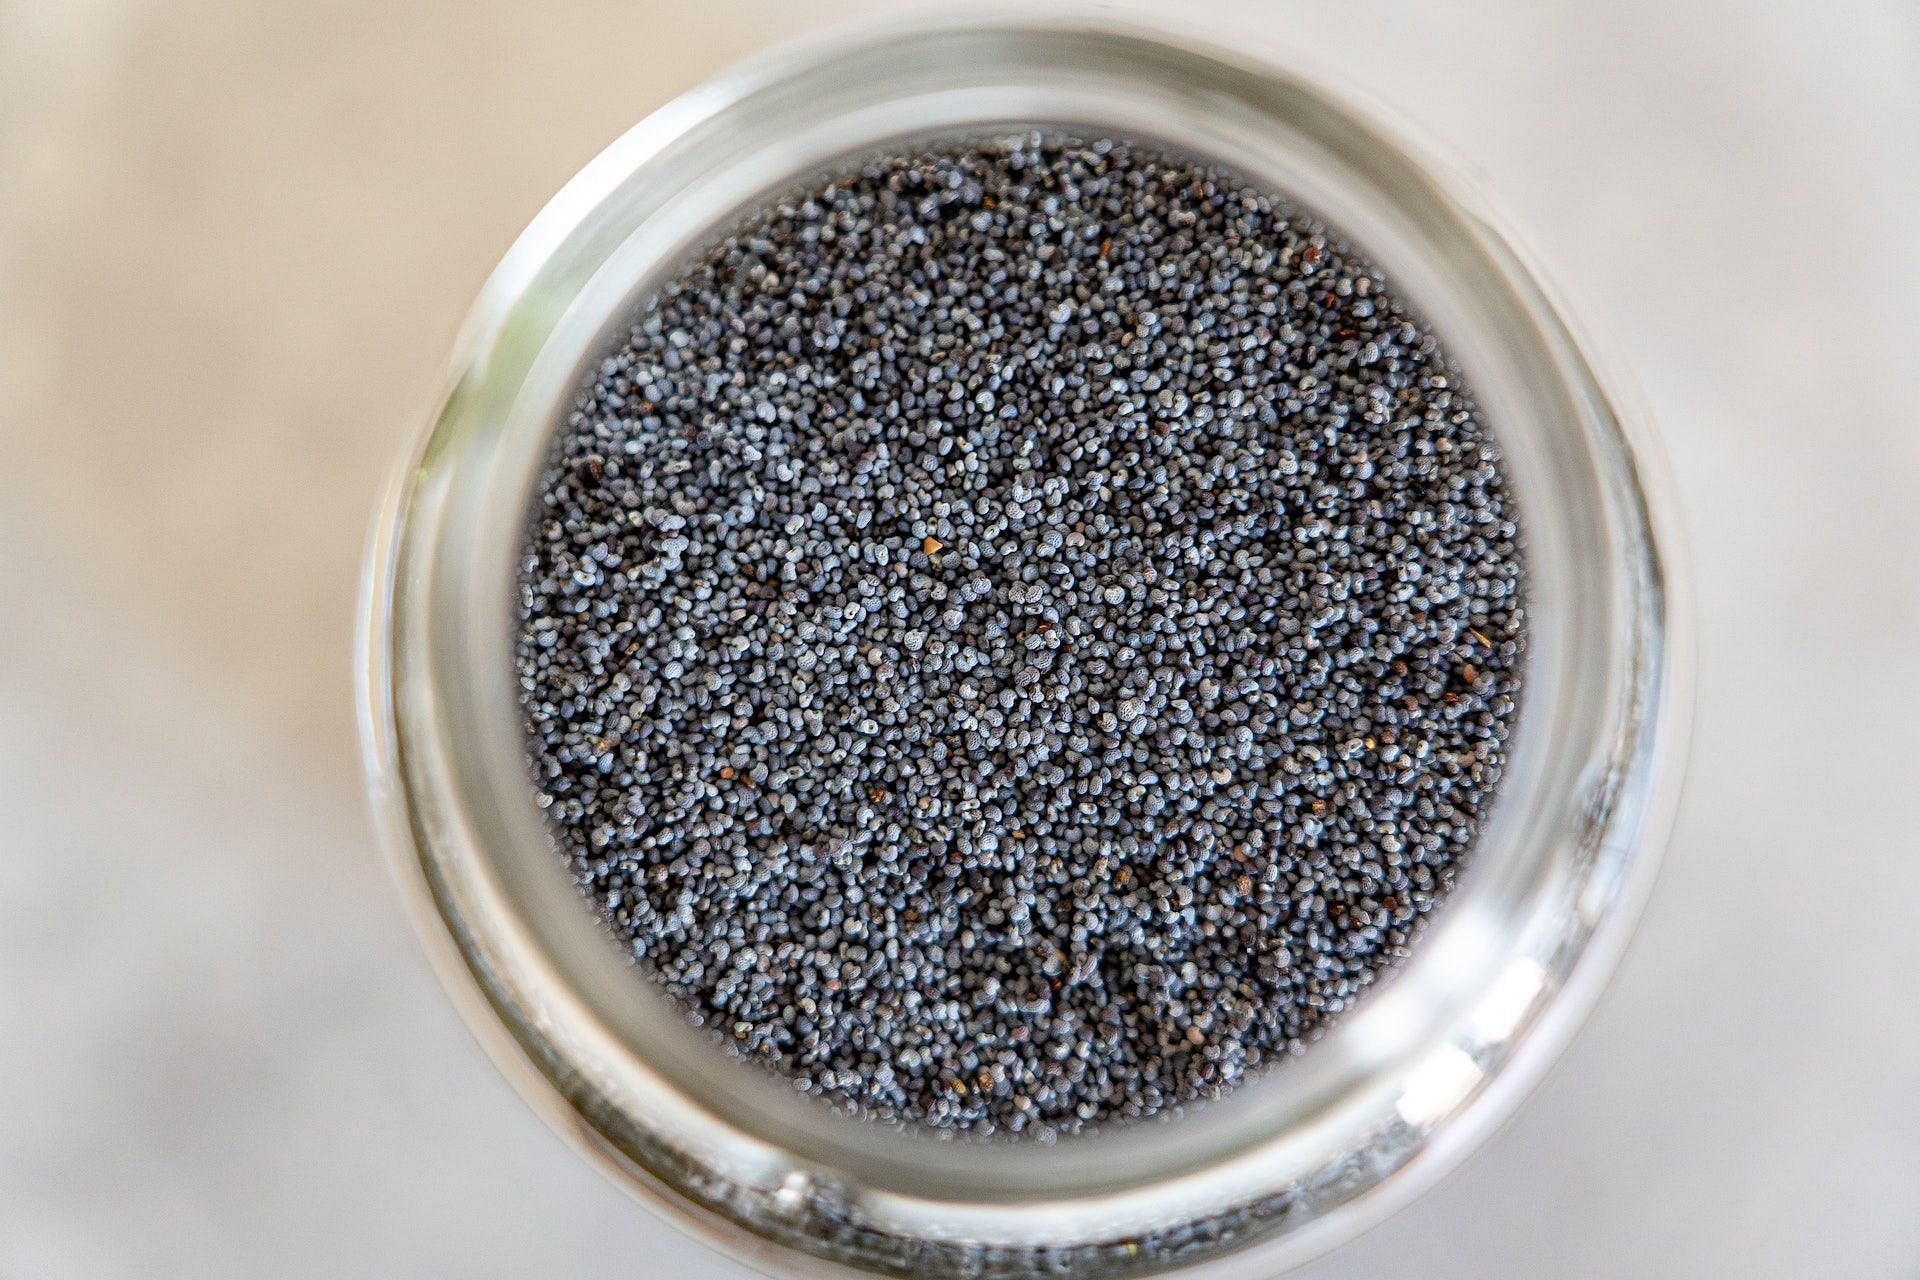 Chia seeds are among some of the most nutritious plant-based protein-rich foods. (Photo via Pexels/Castorly Stock)